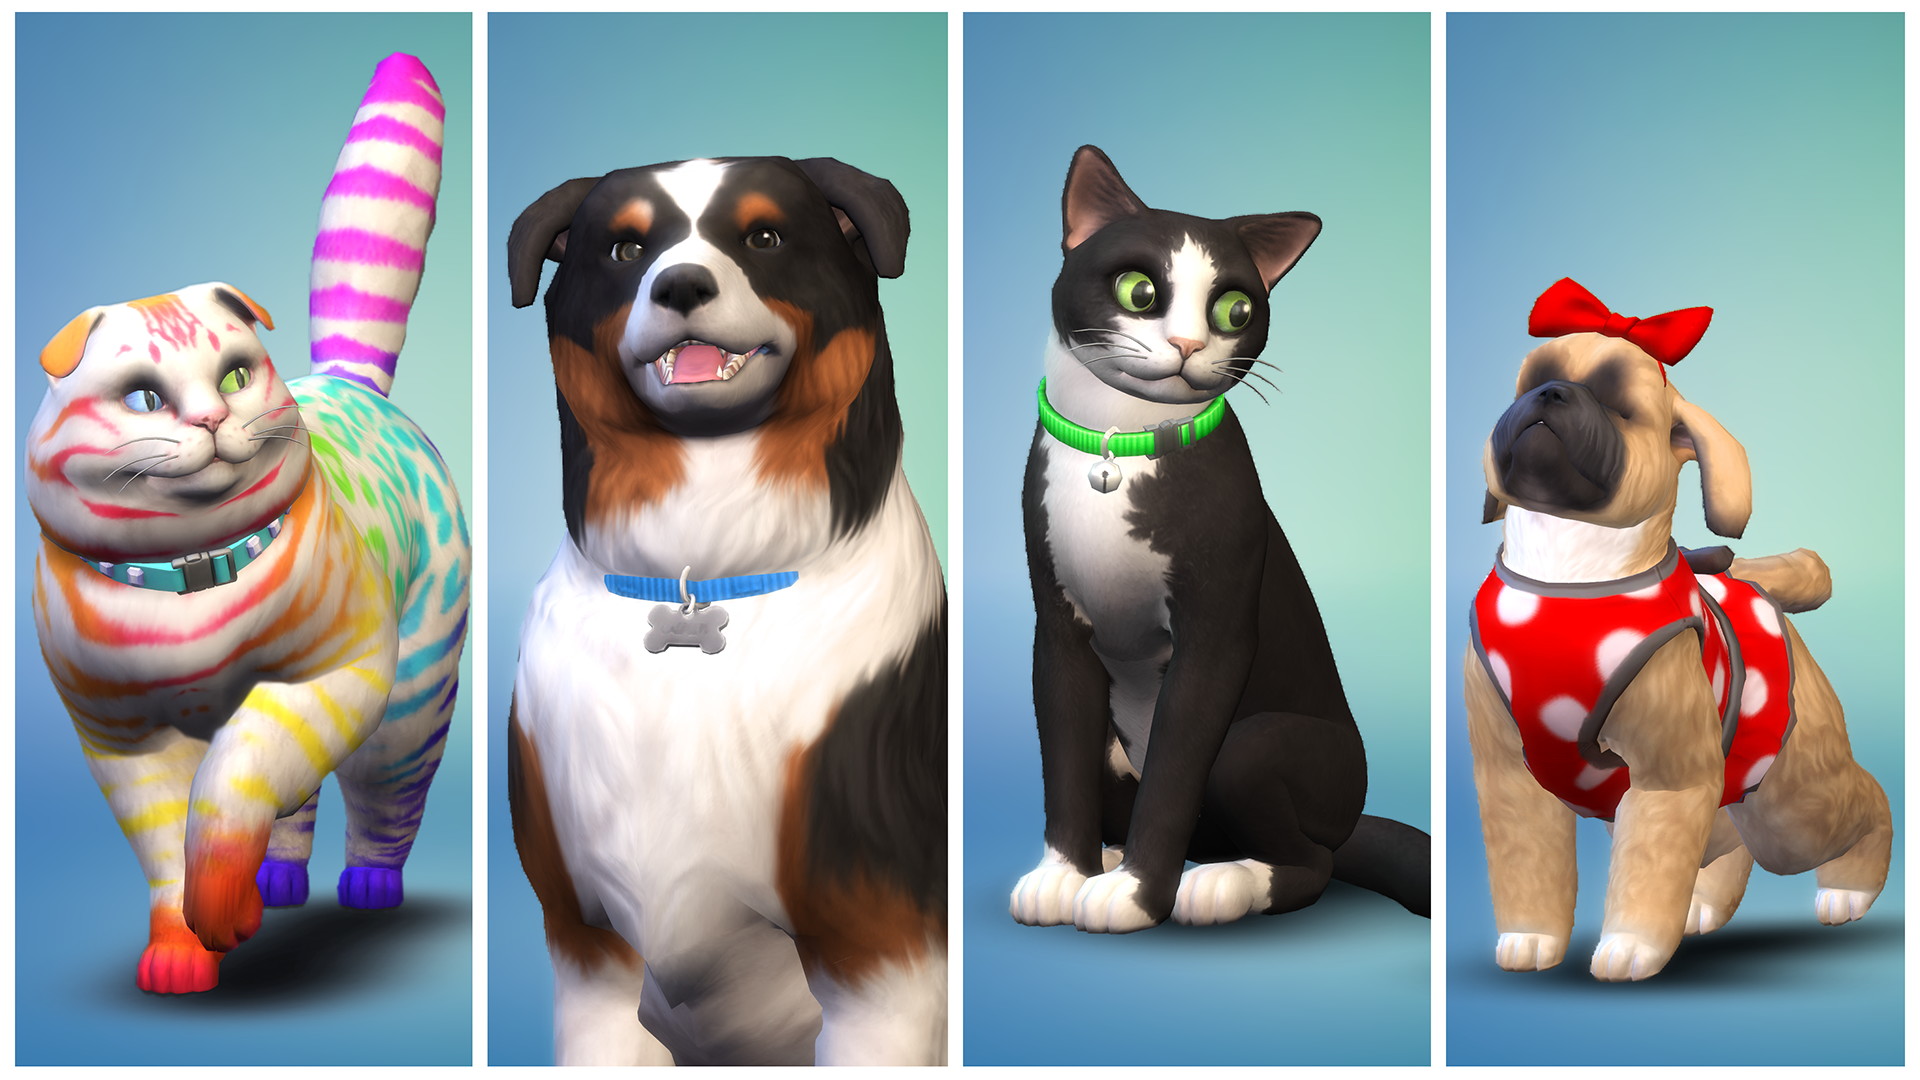 The Sims 4: Cats & Dogs - screenshot 4